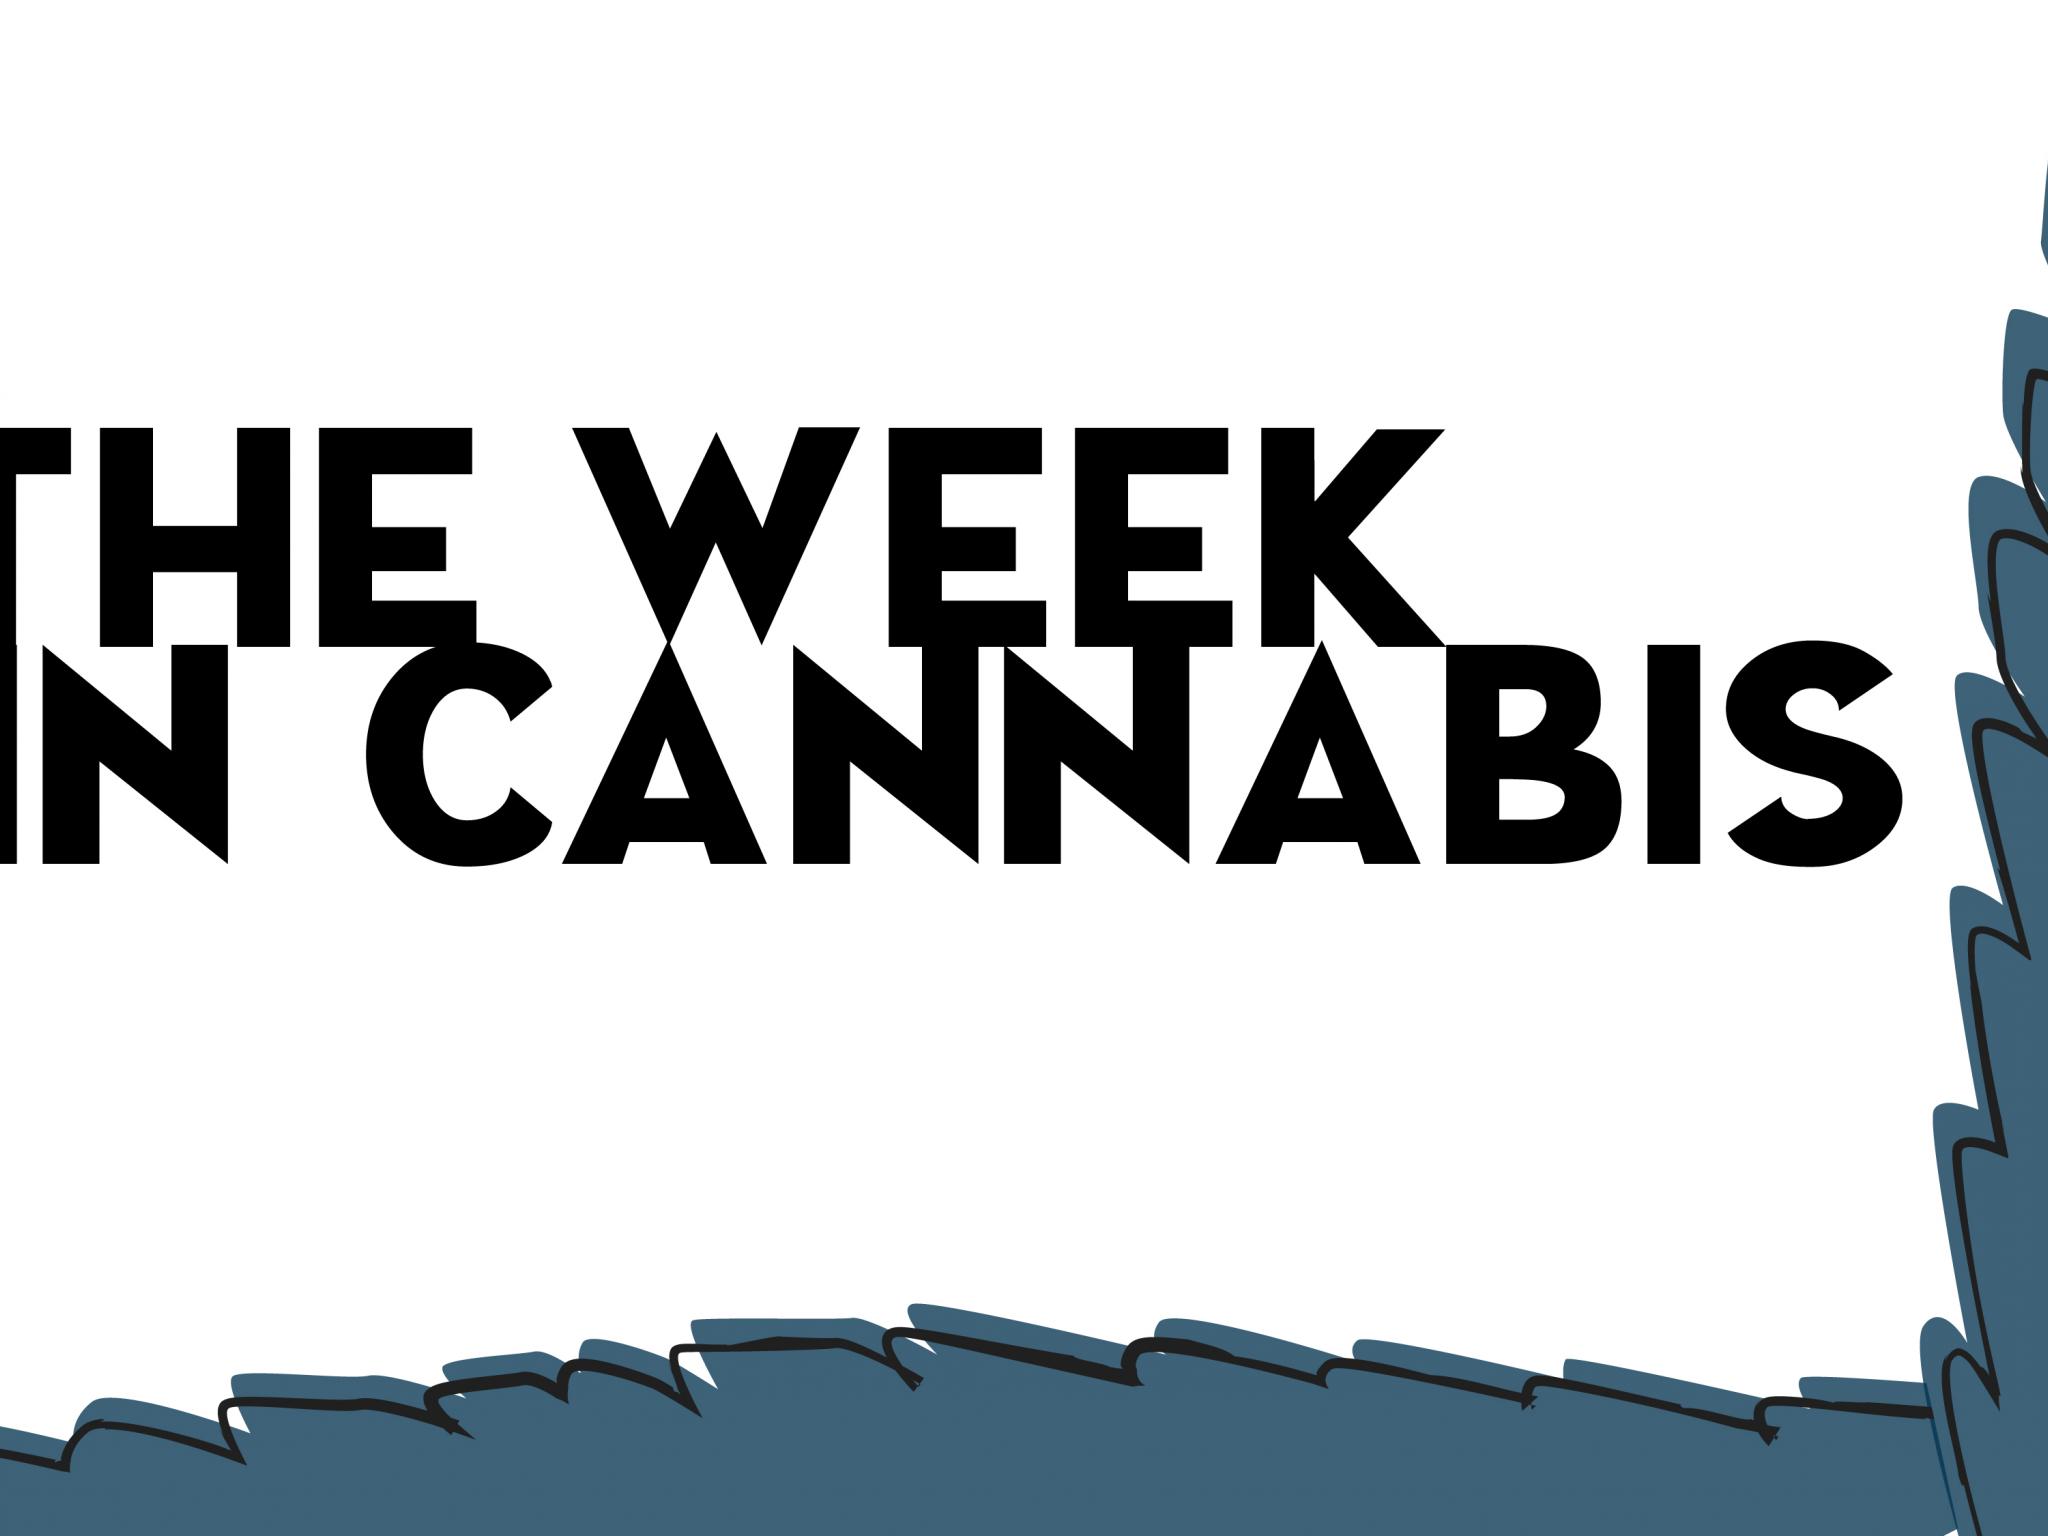  the-week-in-cannabis-mixed-stock-performance-driven-by-mixed-bag-of-news 